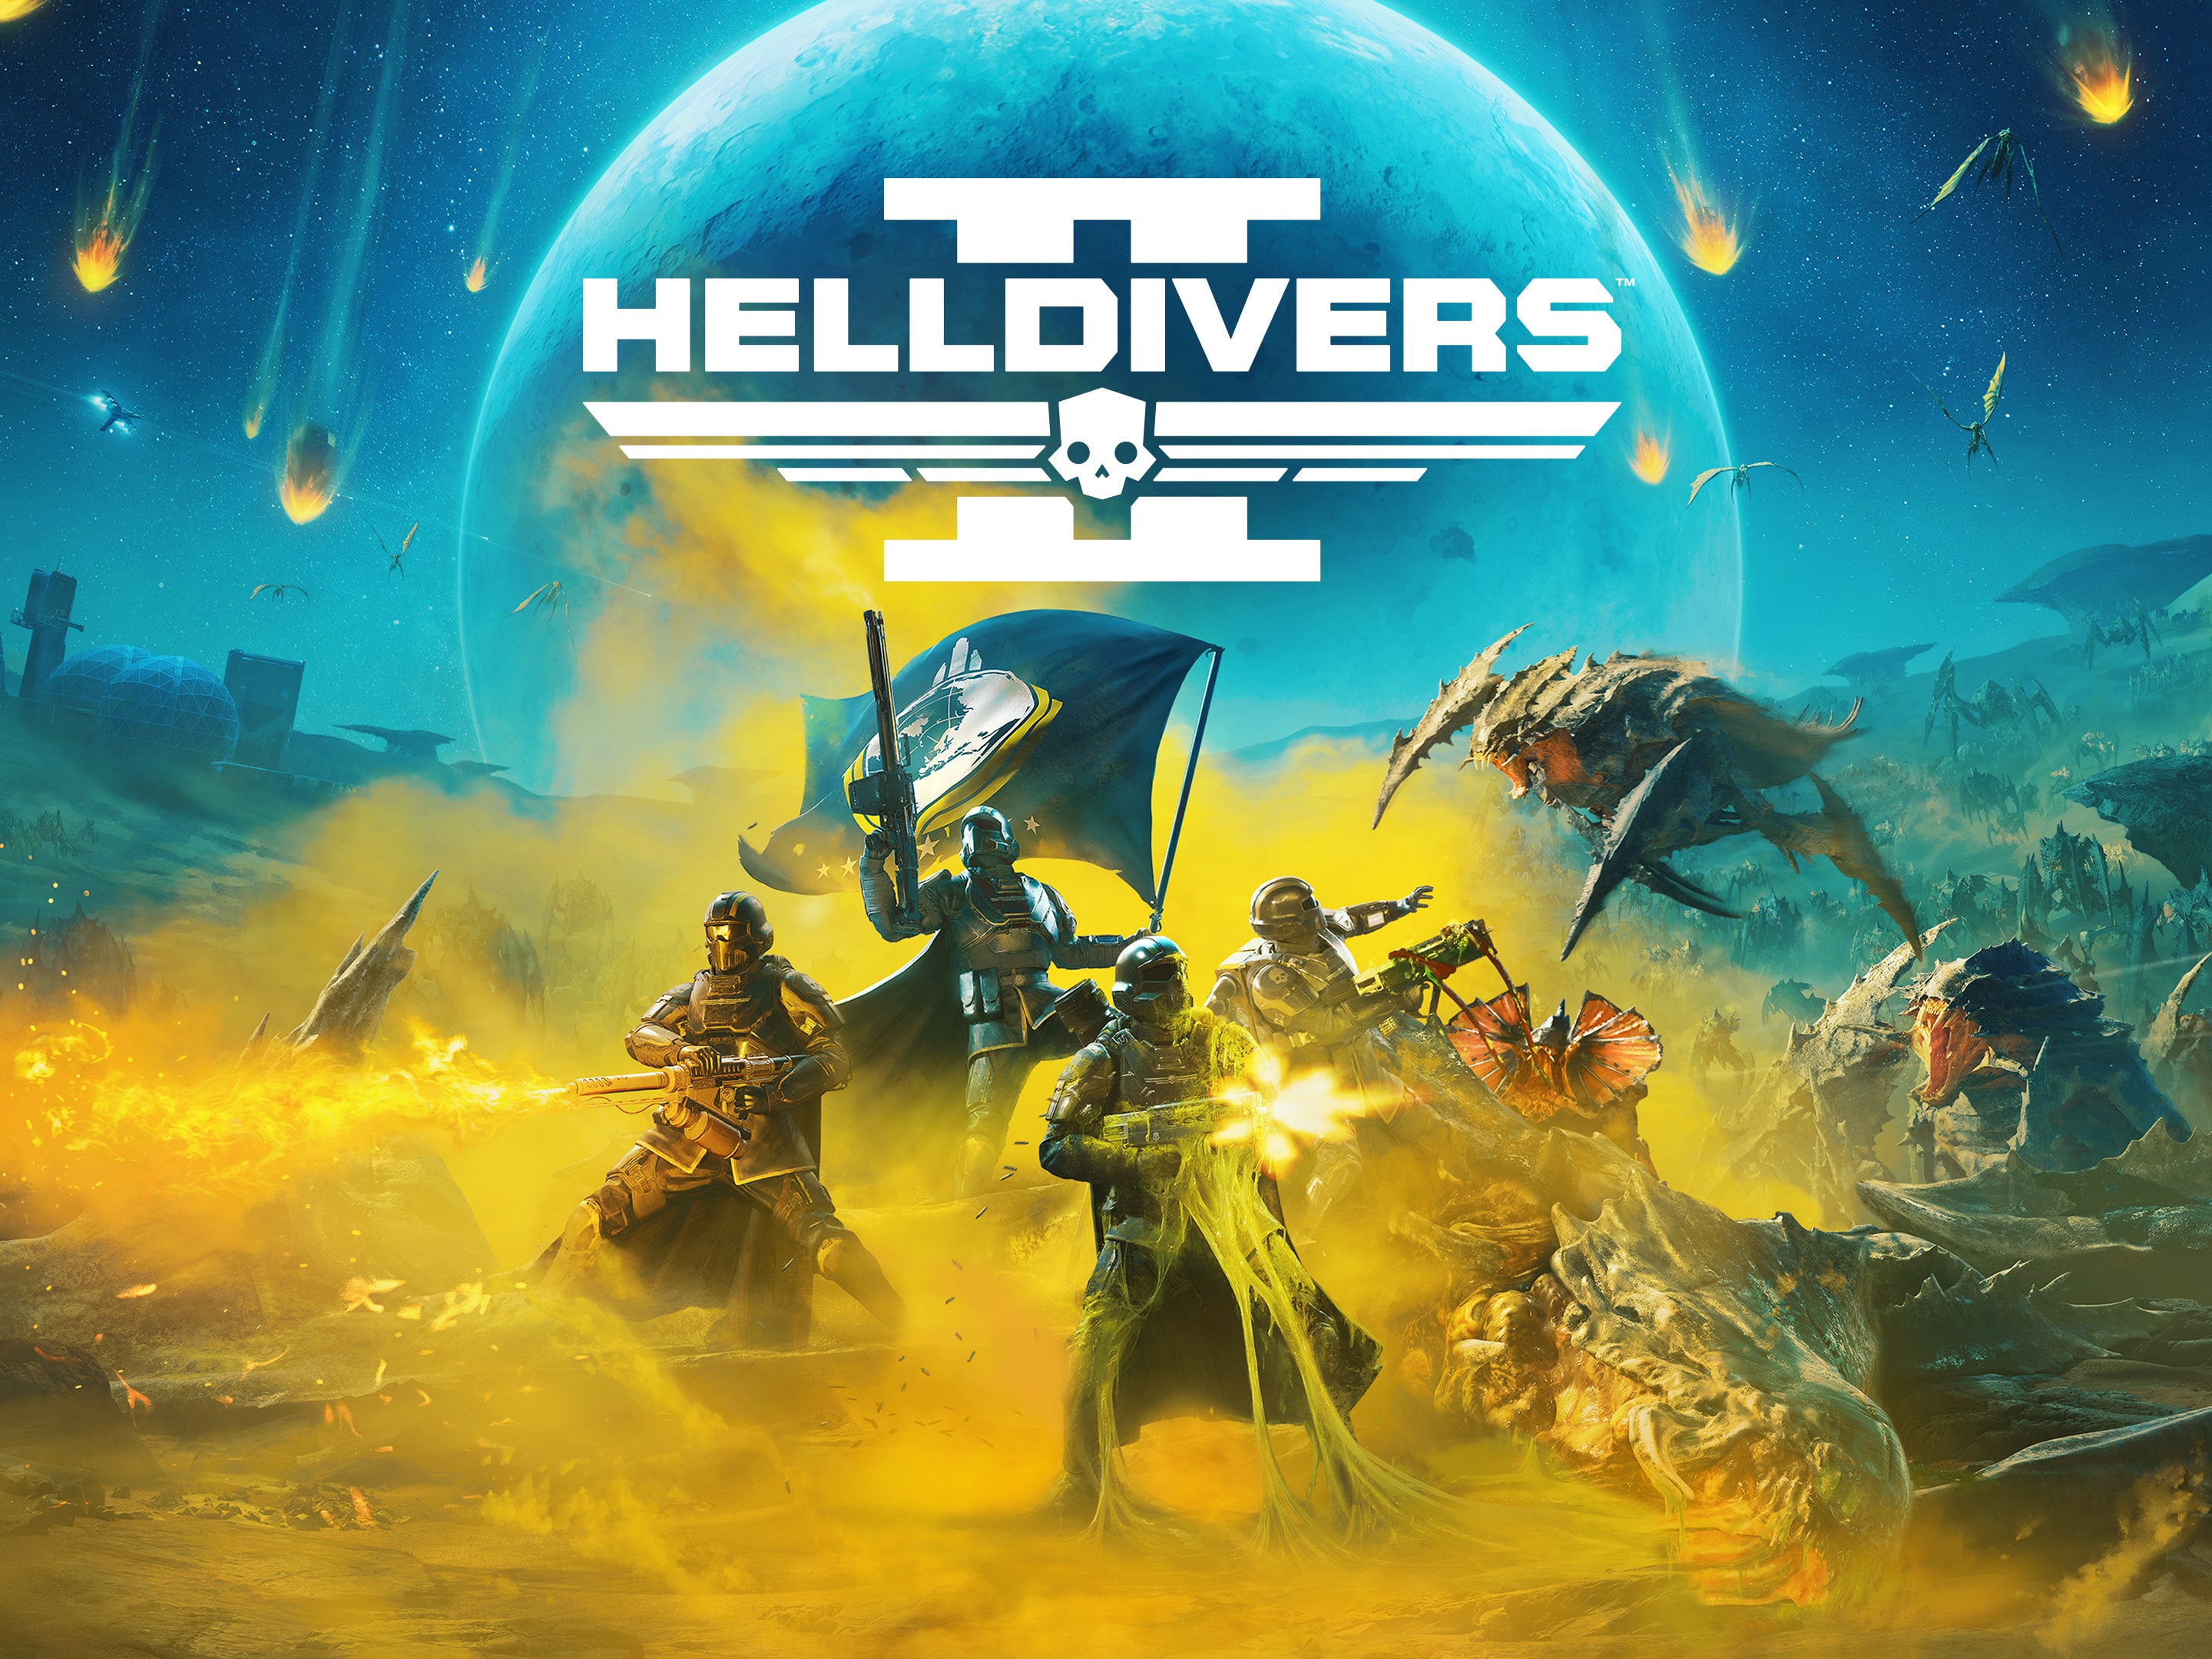 The negative effects are starting to wear me down : r/Helldivers